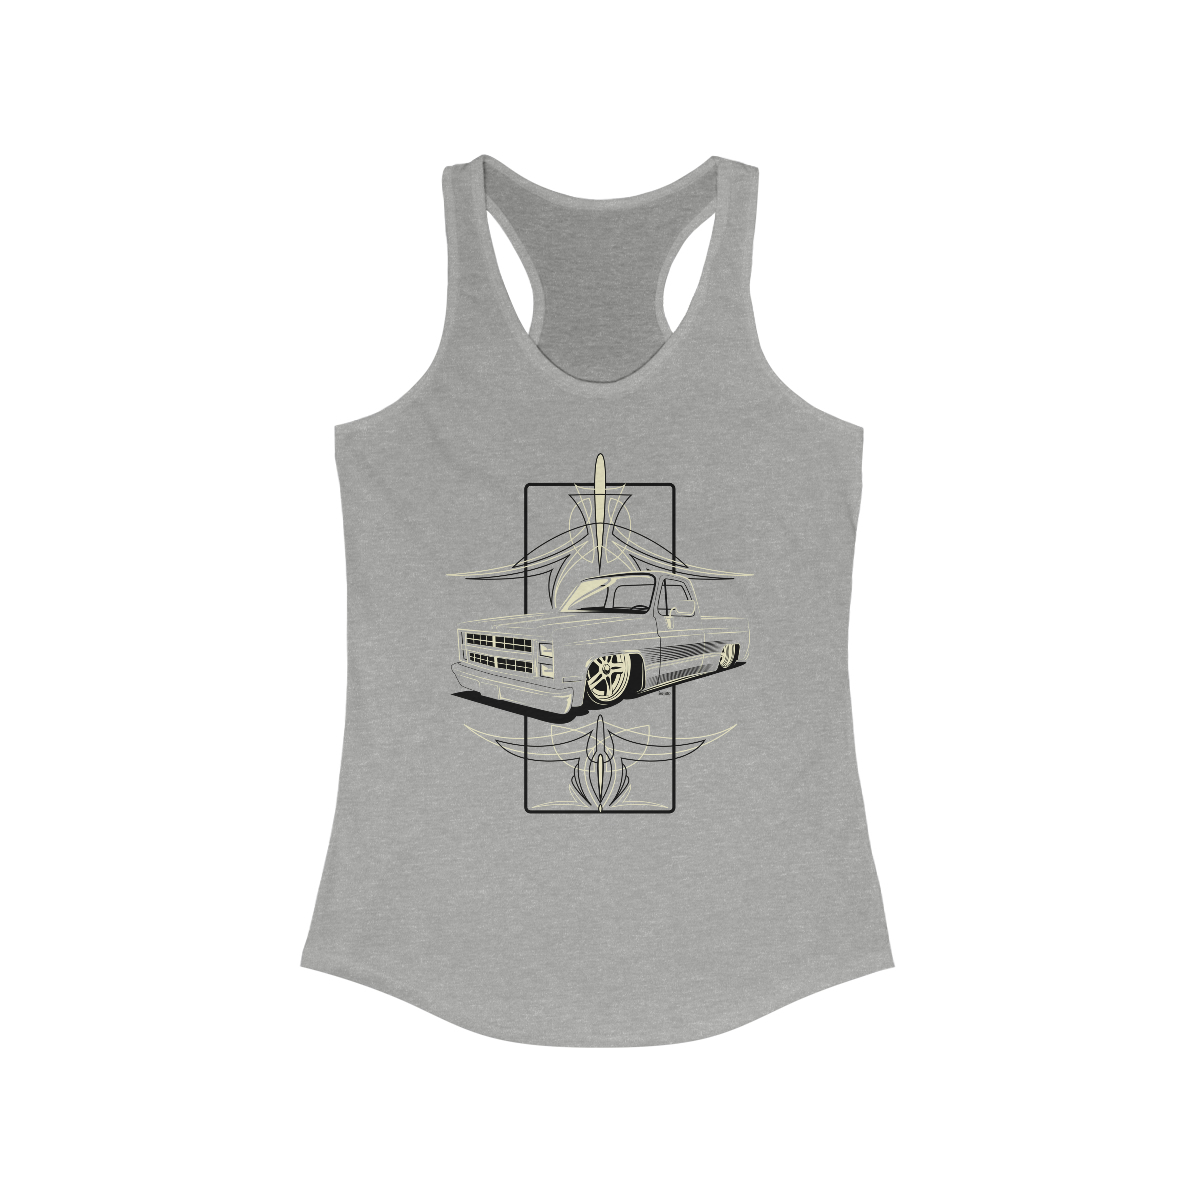 SquareBody with Pinstriping Women’s Ideal Racerback Tank